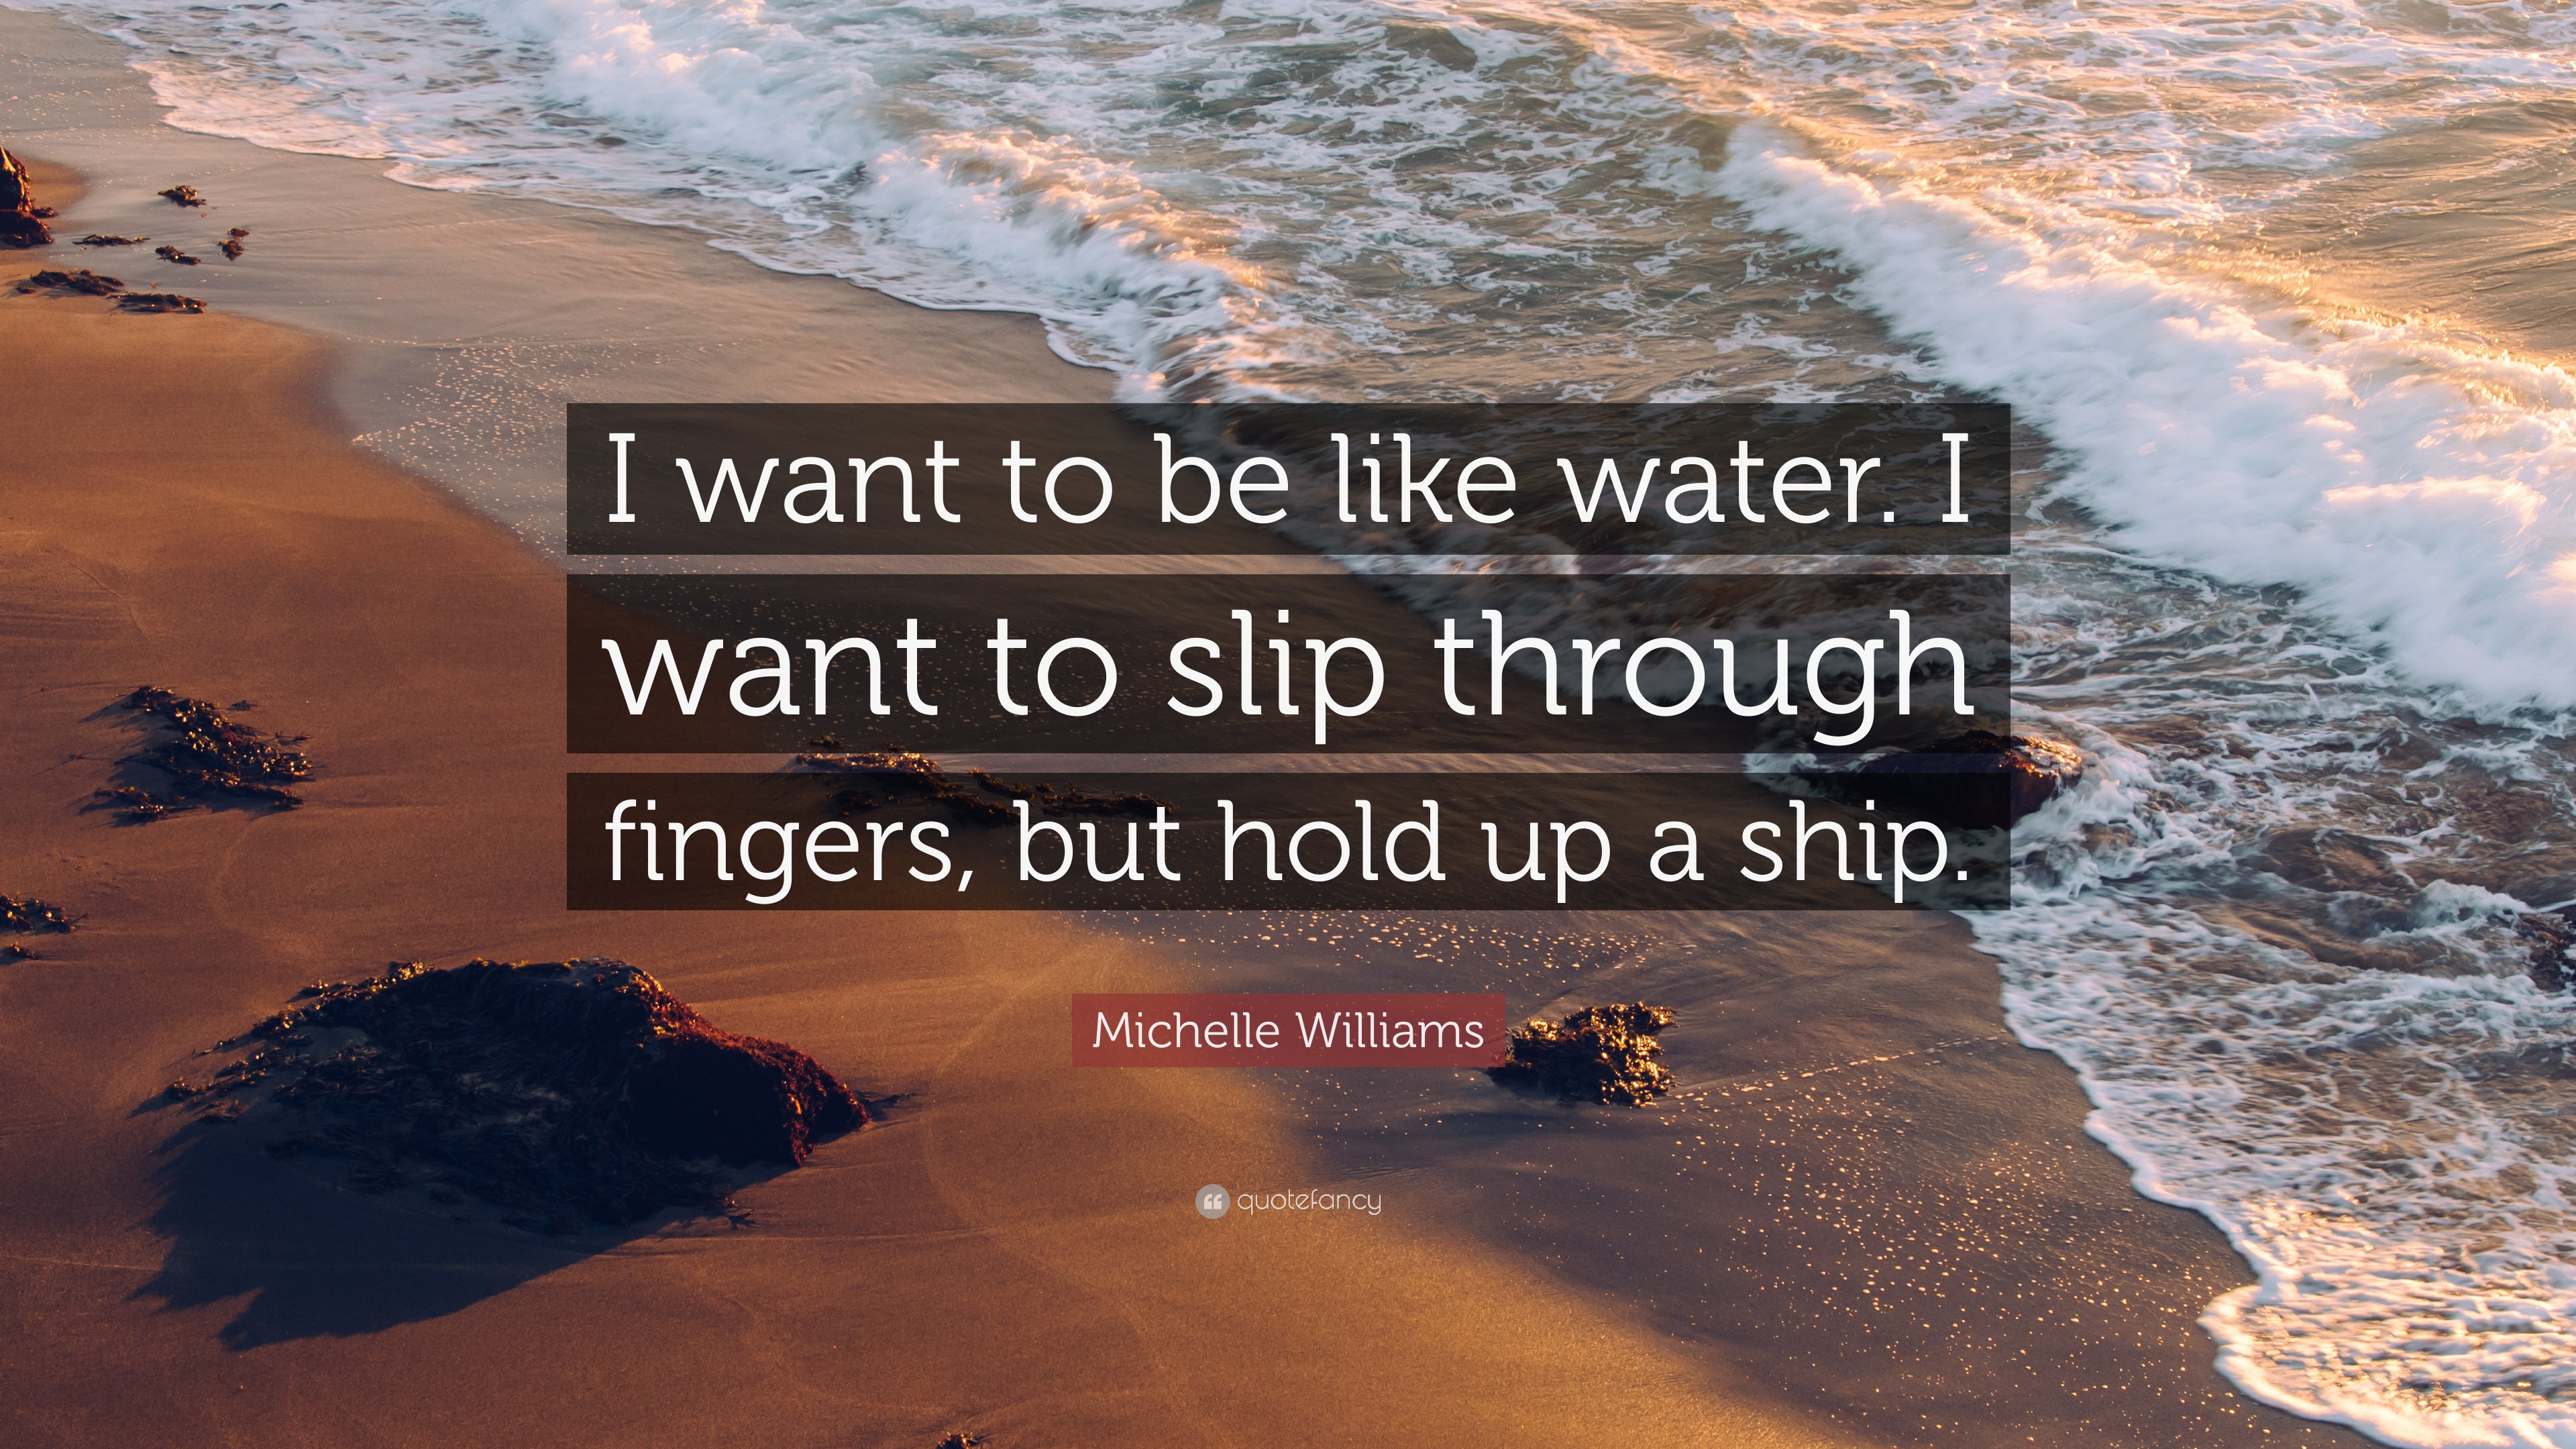 Michelle Williams Quote: “I want to be like water. I want to slip ...